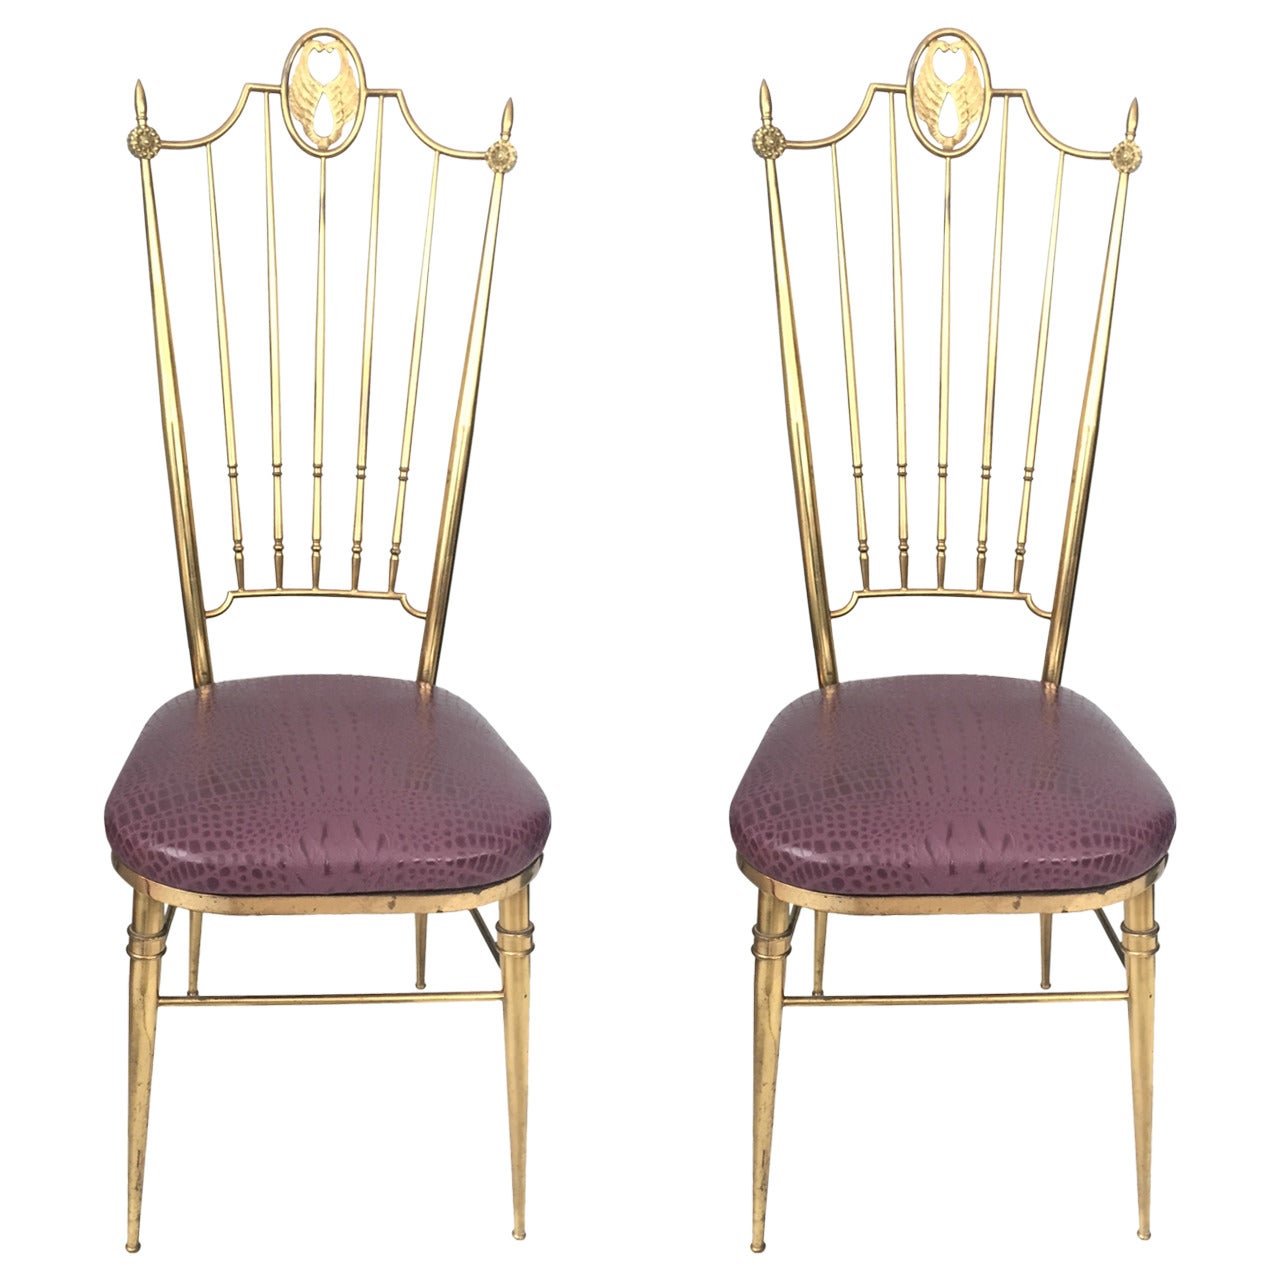 Tall Back Brass Italian Side Chairs with Aubergine Crocodile Leather Pair avail